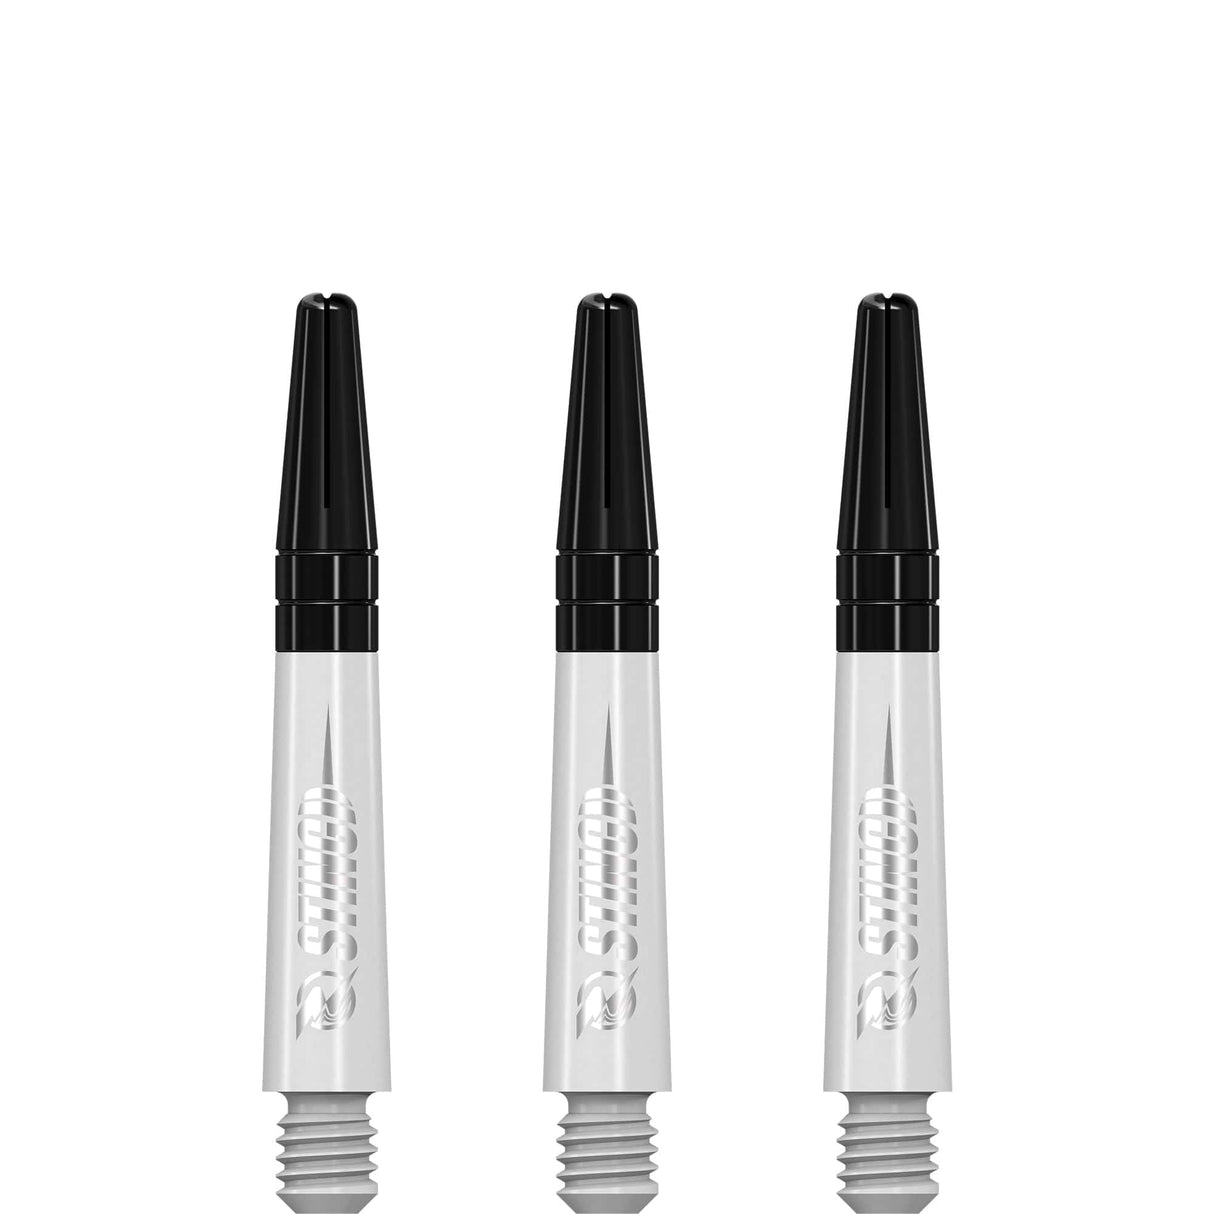 Ruthless Sting Dart Shafts - Polycarbonate - Solid White - Black Top Short